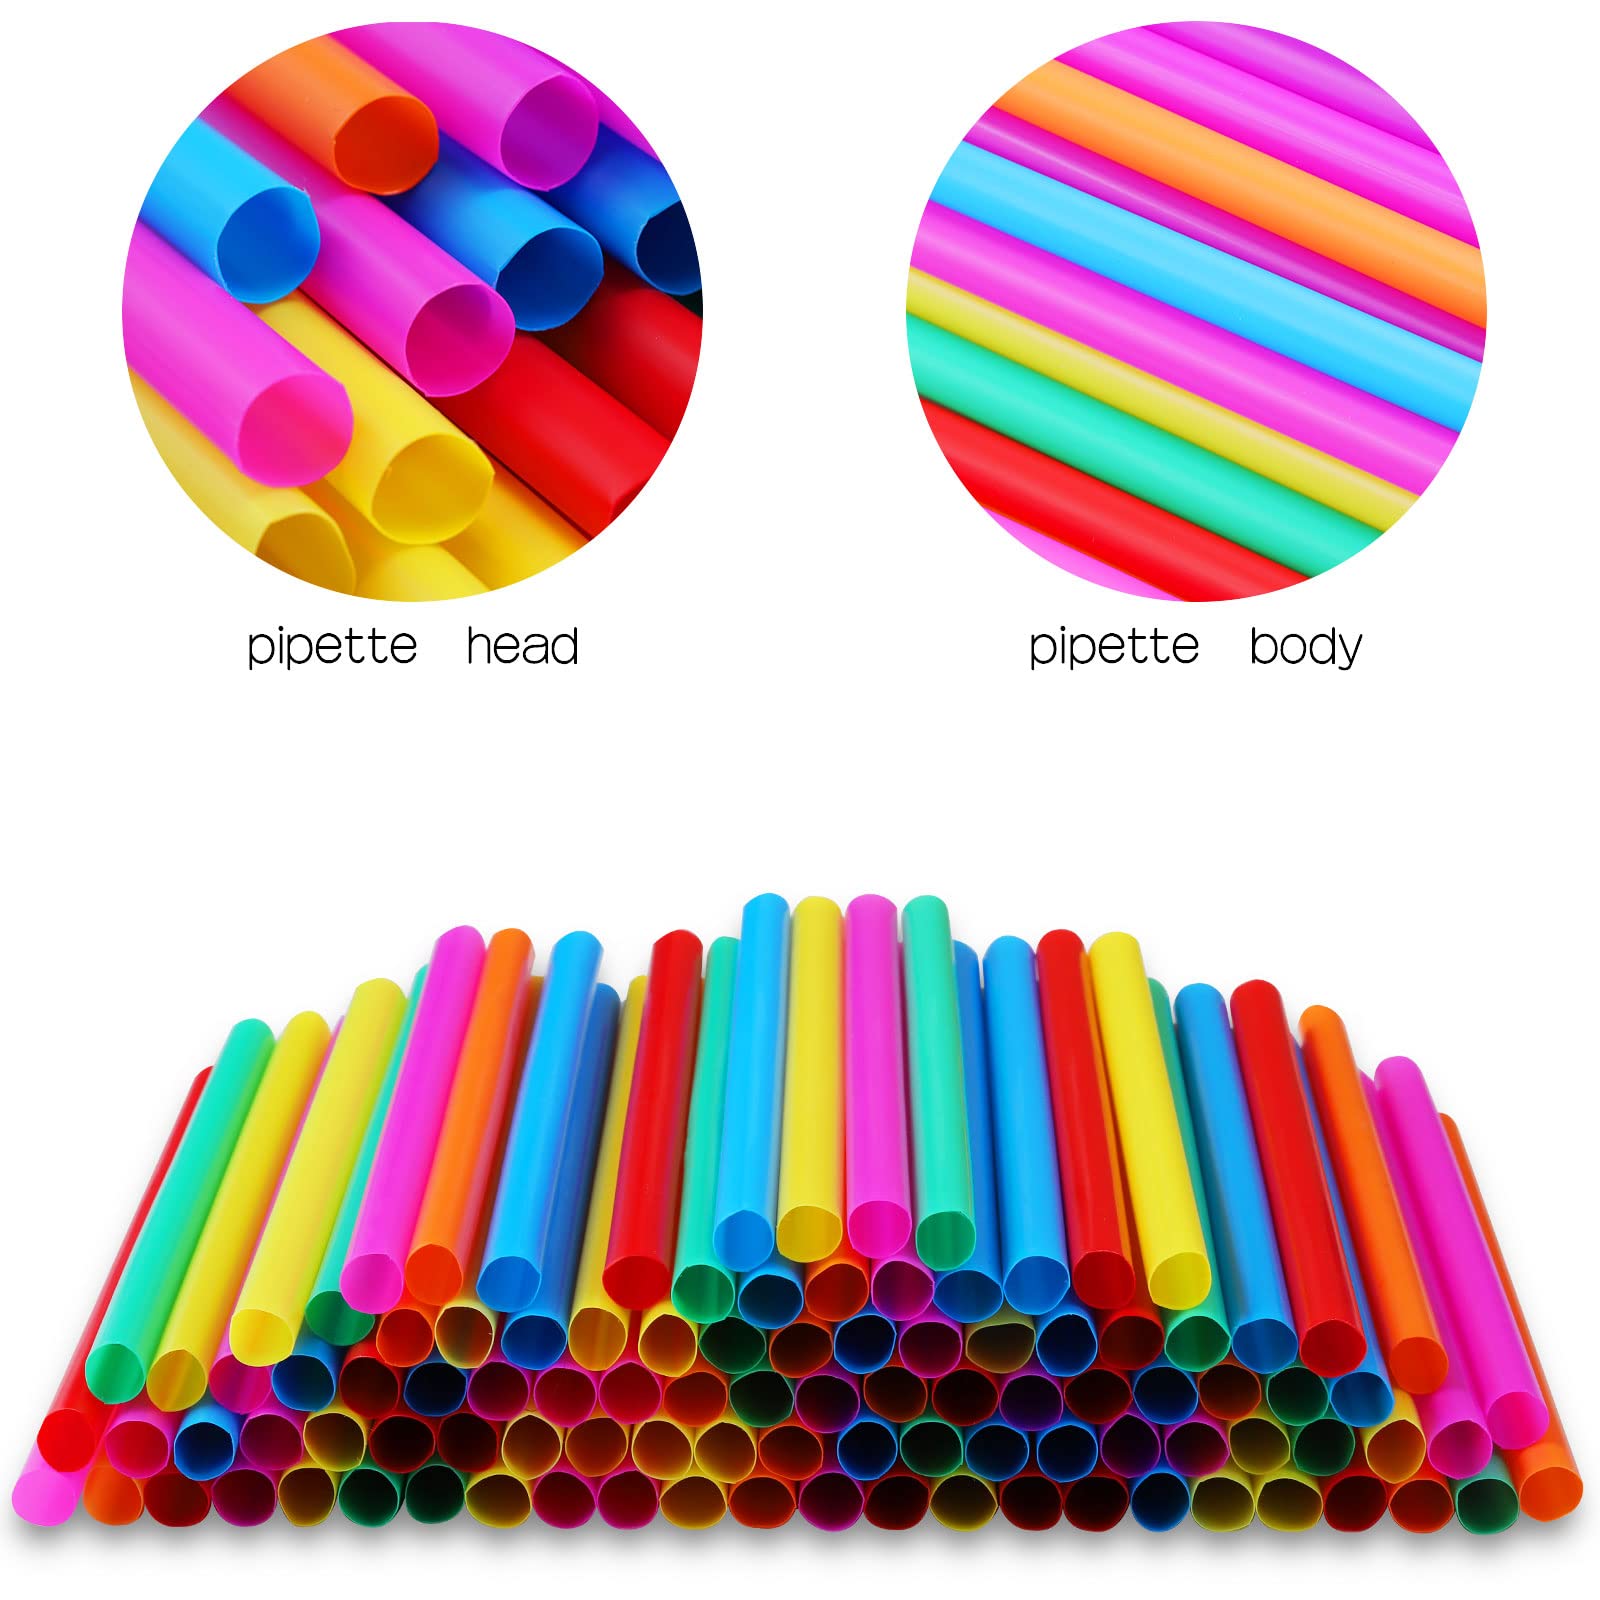 200Pcs Jumbo Straws,Assorted Colors Smoothie Straws Disposable,Wide-mouthed Boba Straw, Large Bubble Tea Straw Extra Long,Plastic Wide Straws for Milkshakes,Beer,Frozen Drinks,Party Supplies